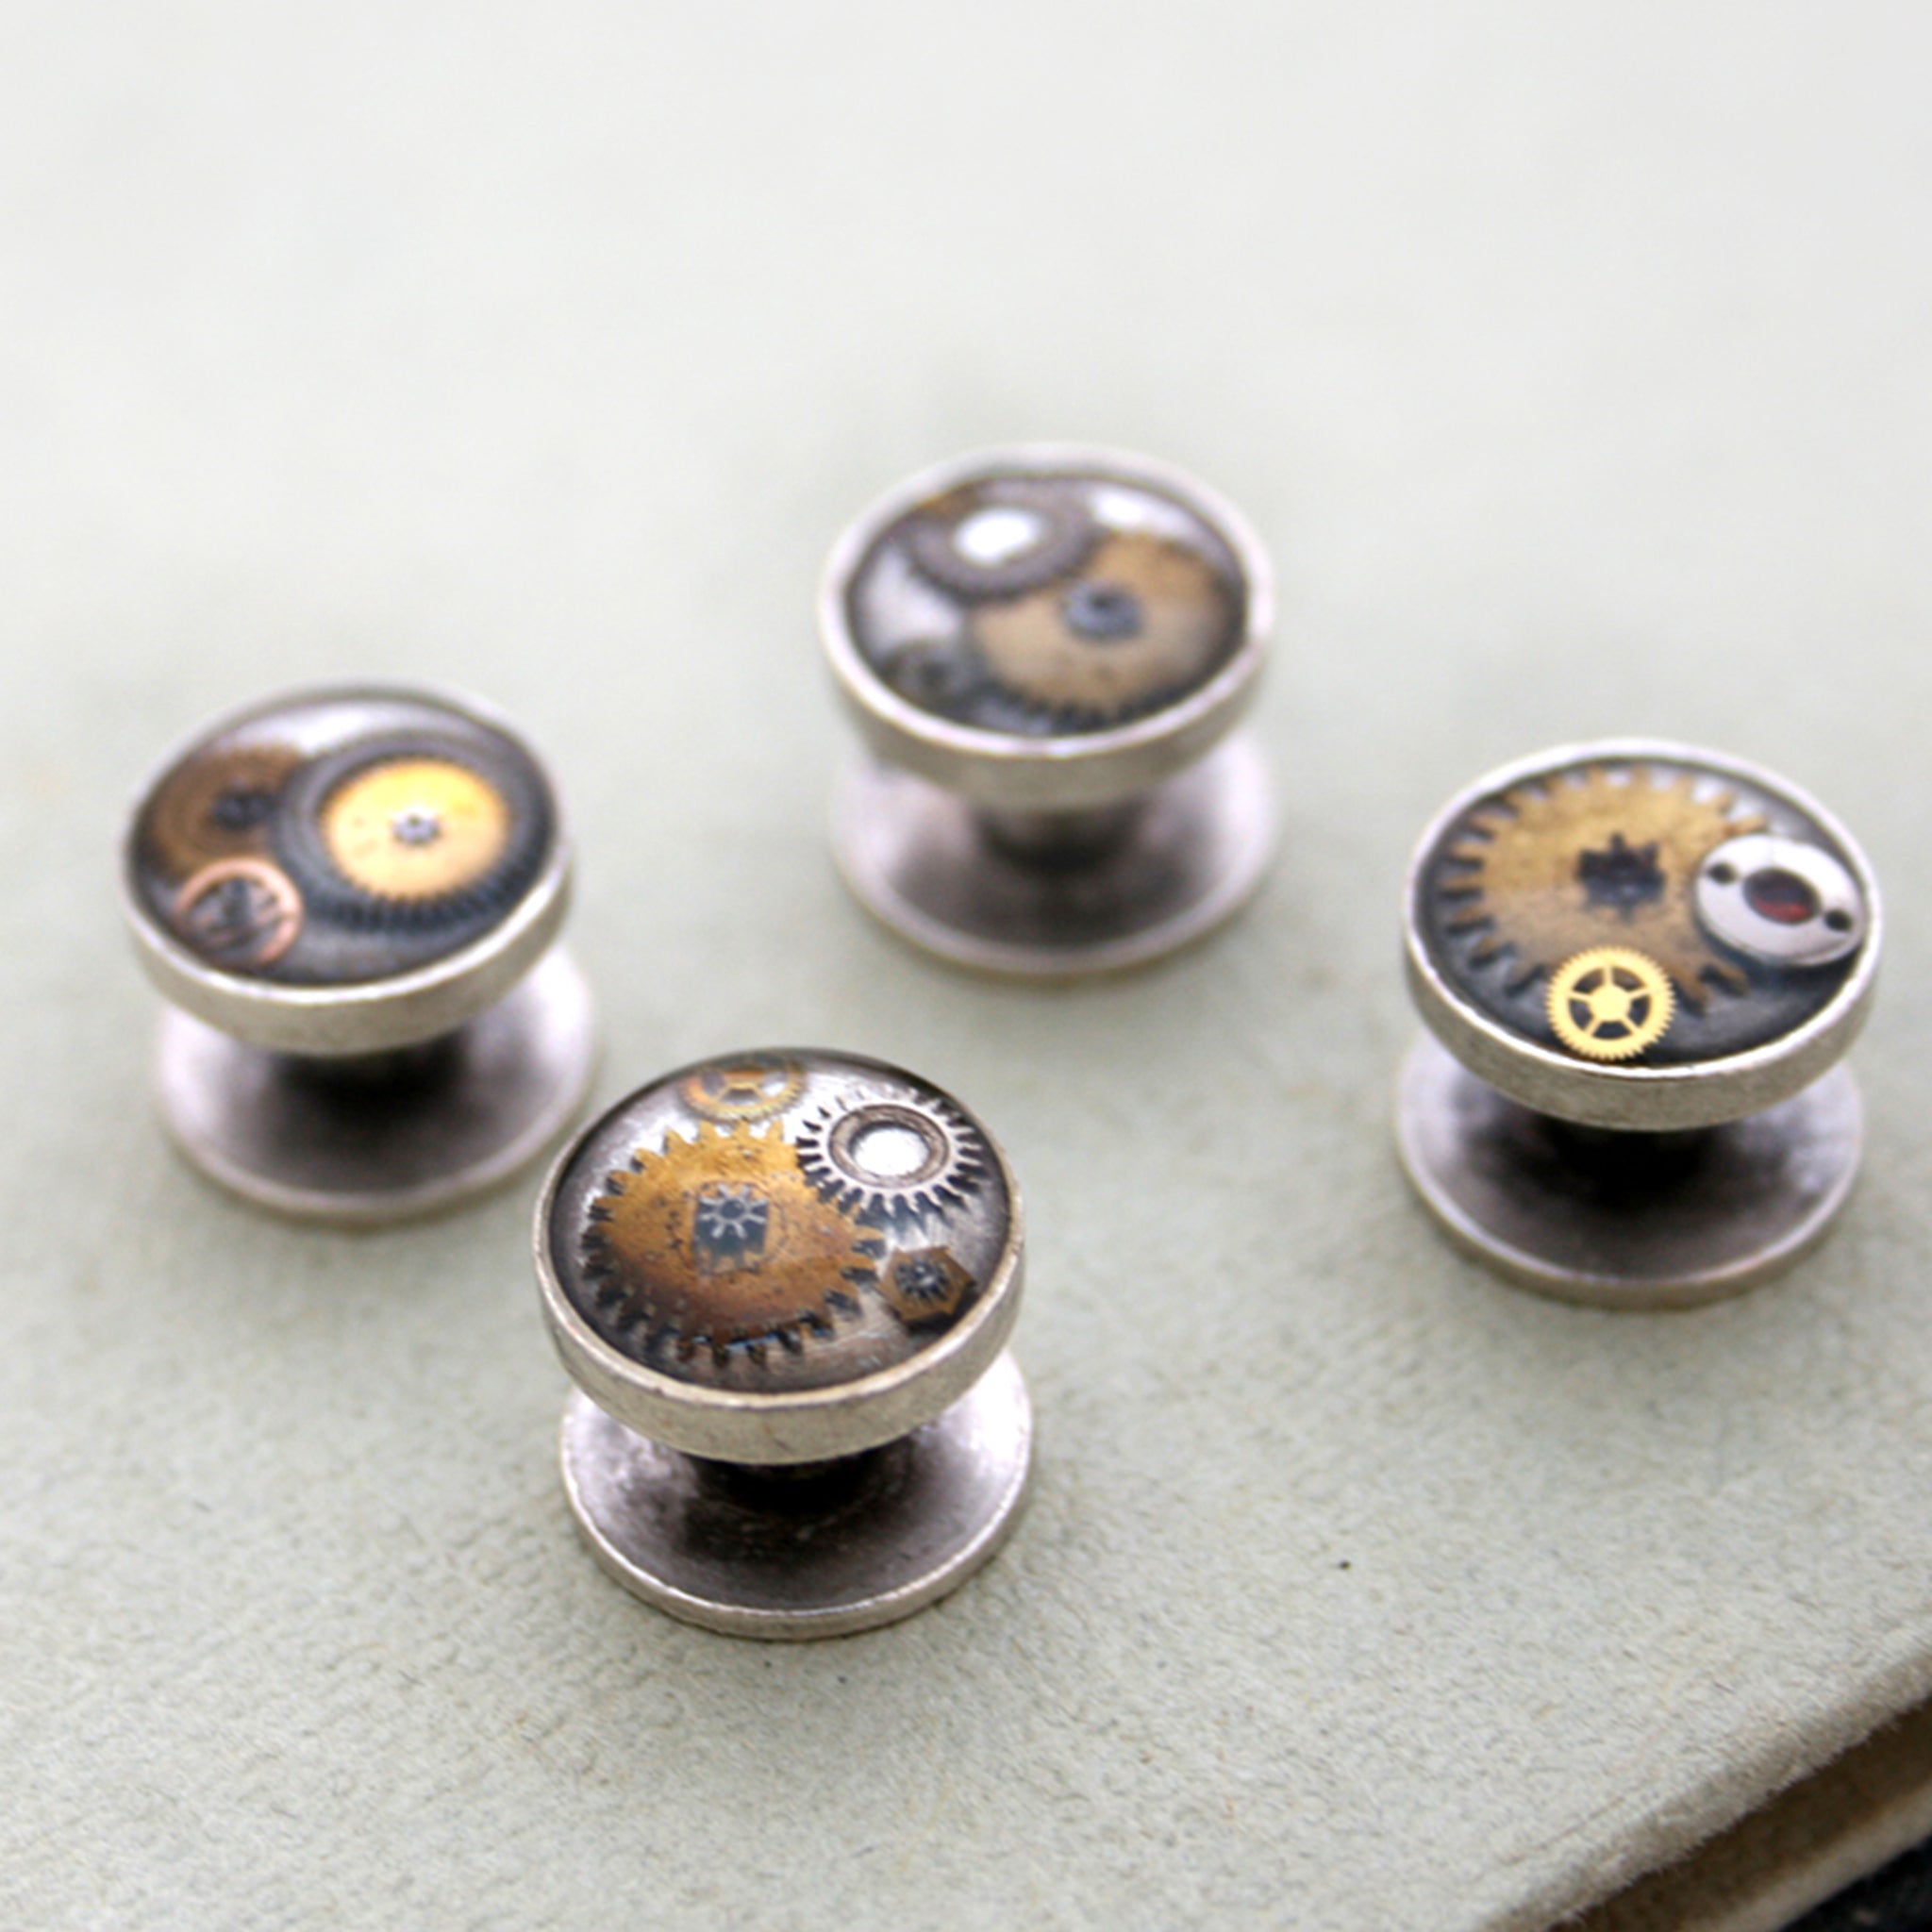 Antique Silver tone tuxedo studs featuring vintage watch parts filled with resin